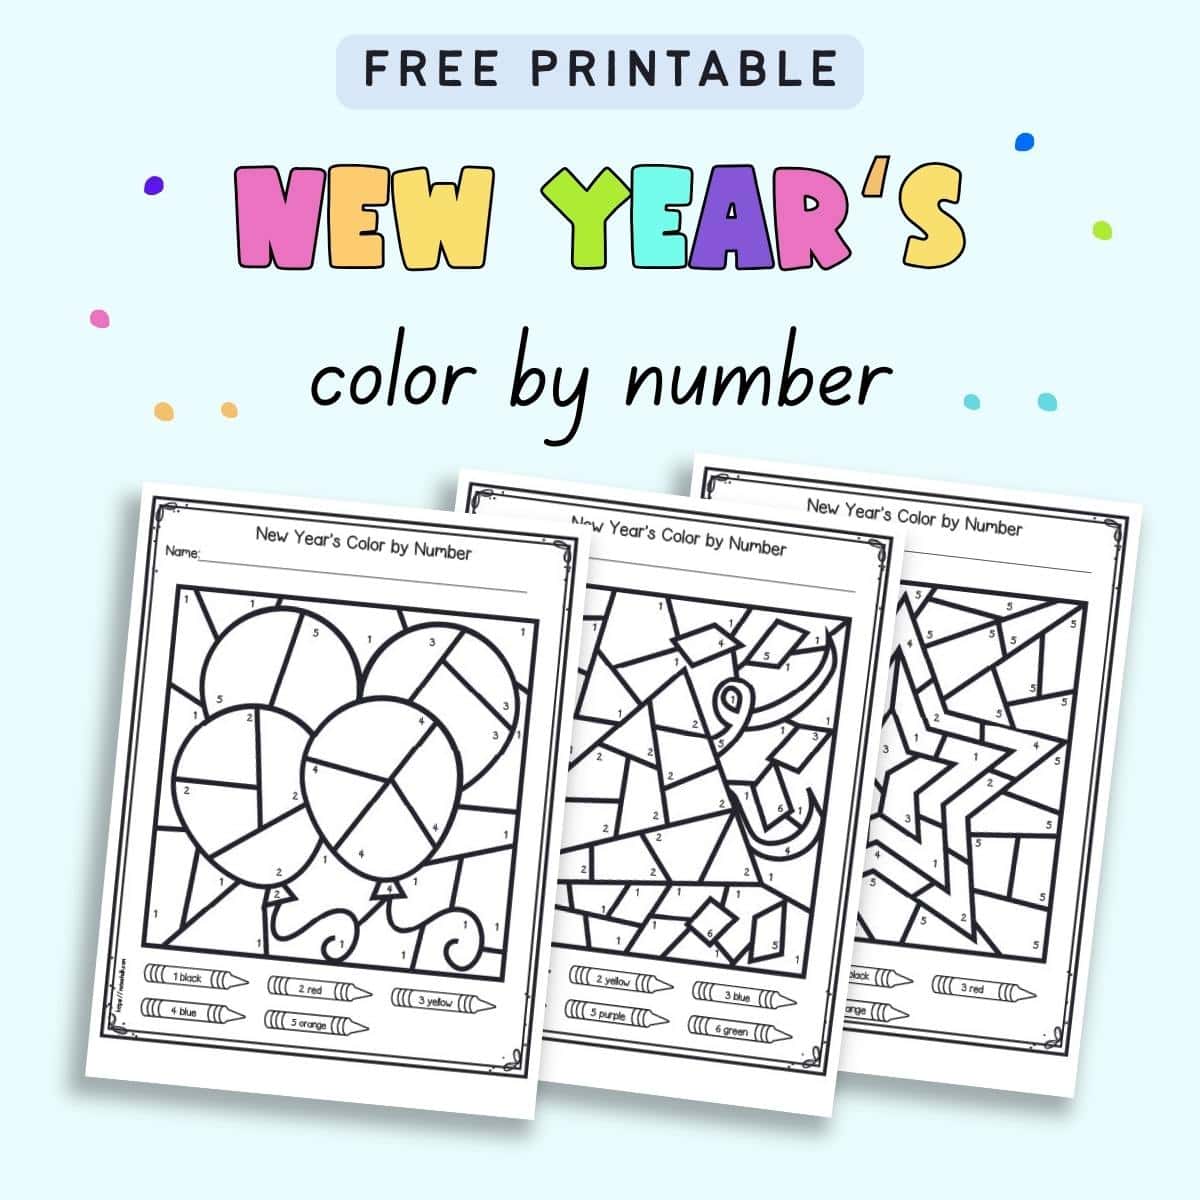 Free Printable New Year's Eve Color by Number Pages - The Artisan Life